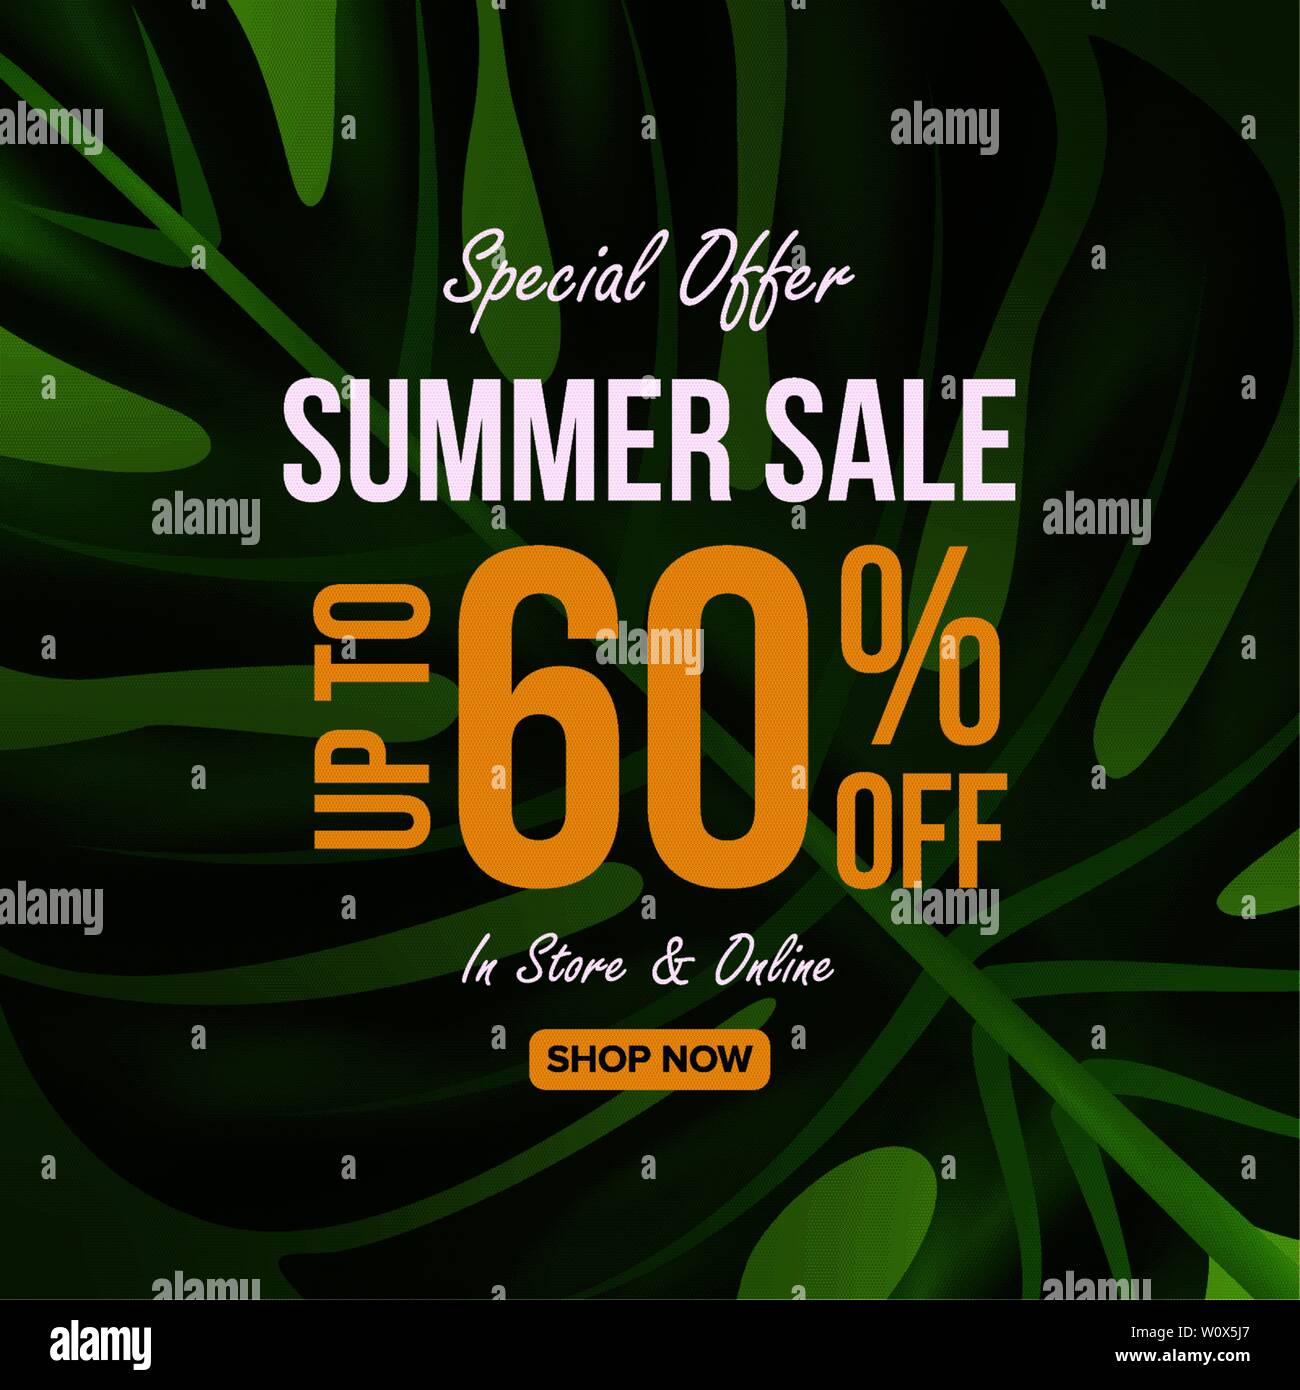 Summer sale banner template, Promo design template for your seasonal promotion. Tropical leaves background. Stock Vector